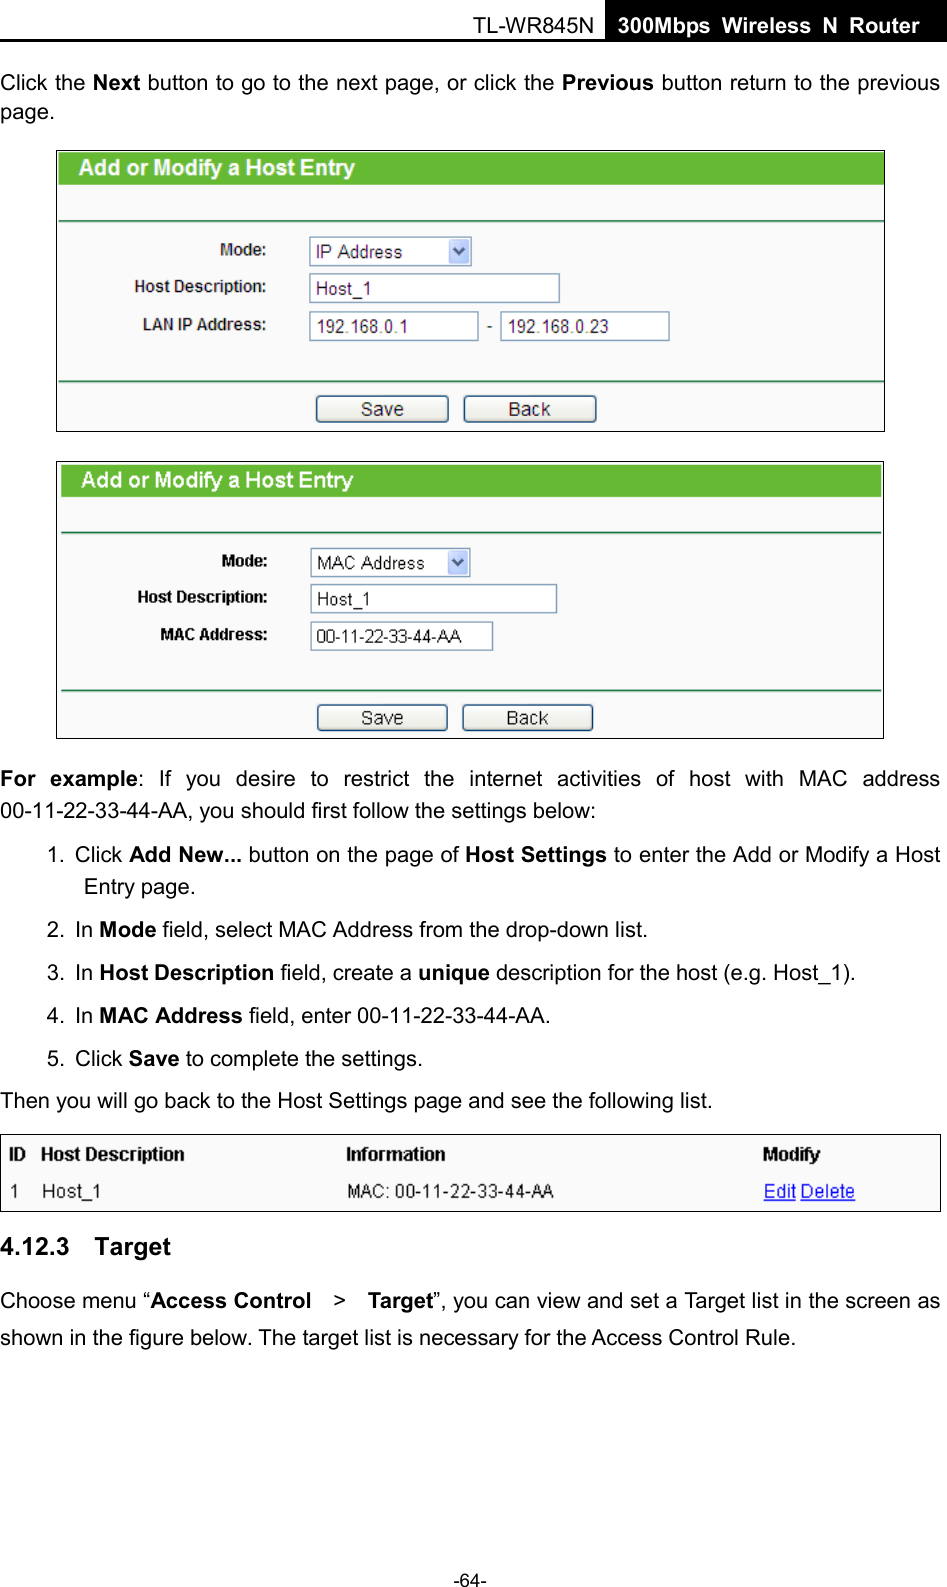  TL-WR845N  300Mbps Wireless N Router    Click the Next button to go to the next page, or click the Previous button return to the previous page.   For  example: If you desire to restrict the internet activities of host with MAC address 00-11-22-33-44-AA, you should first follow the settings below:   1. Click Add New... button on the page of Host Settings to enter the Add or Modify a Host Entry page.   2. In Mode field, select MAC Address from the drop-down list.   3. In Host Description field, create a unique description for the host (e.g. Host_1).   4. In MAC Address field, enter 00-11-22-33-44-AA.   5. Click Save to complete the settings.   Then you will go back to the Host Settings page and see the following list.  4.12.3  Target Choose menu “Access Control  &gt;   Target”, you can view and set a Target list in the screen as shown in the figure below. The target list is necessary for the Access Control Rule. -64- 